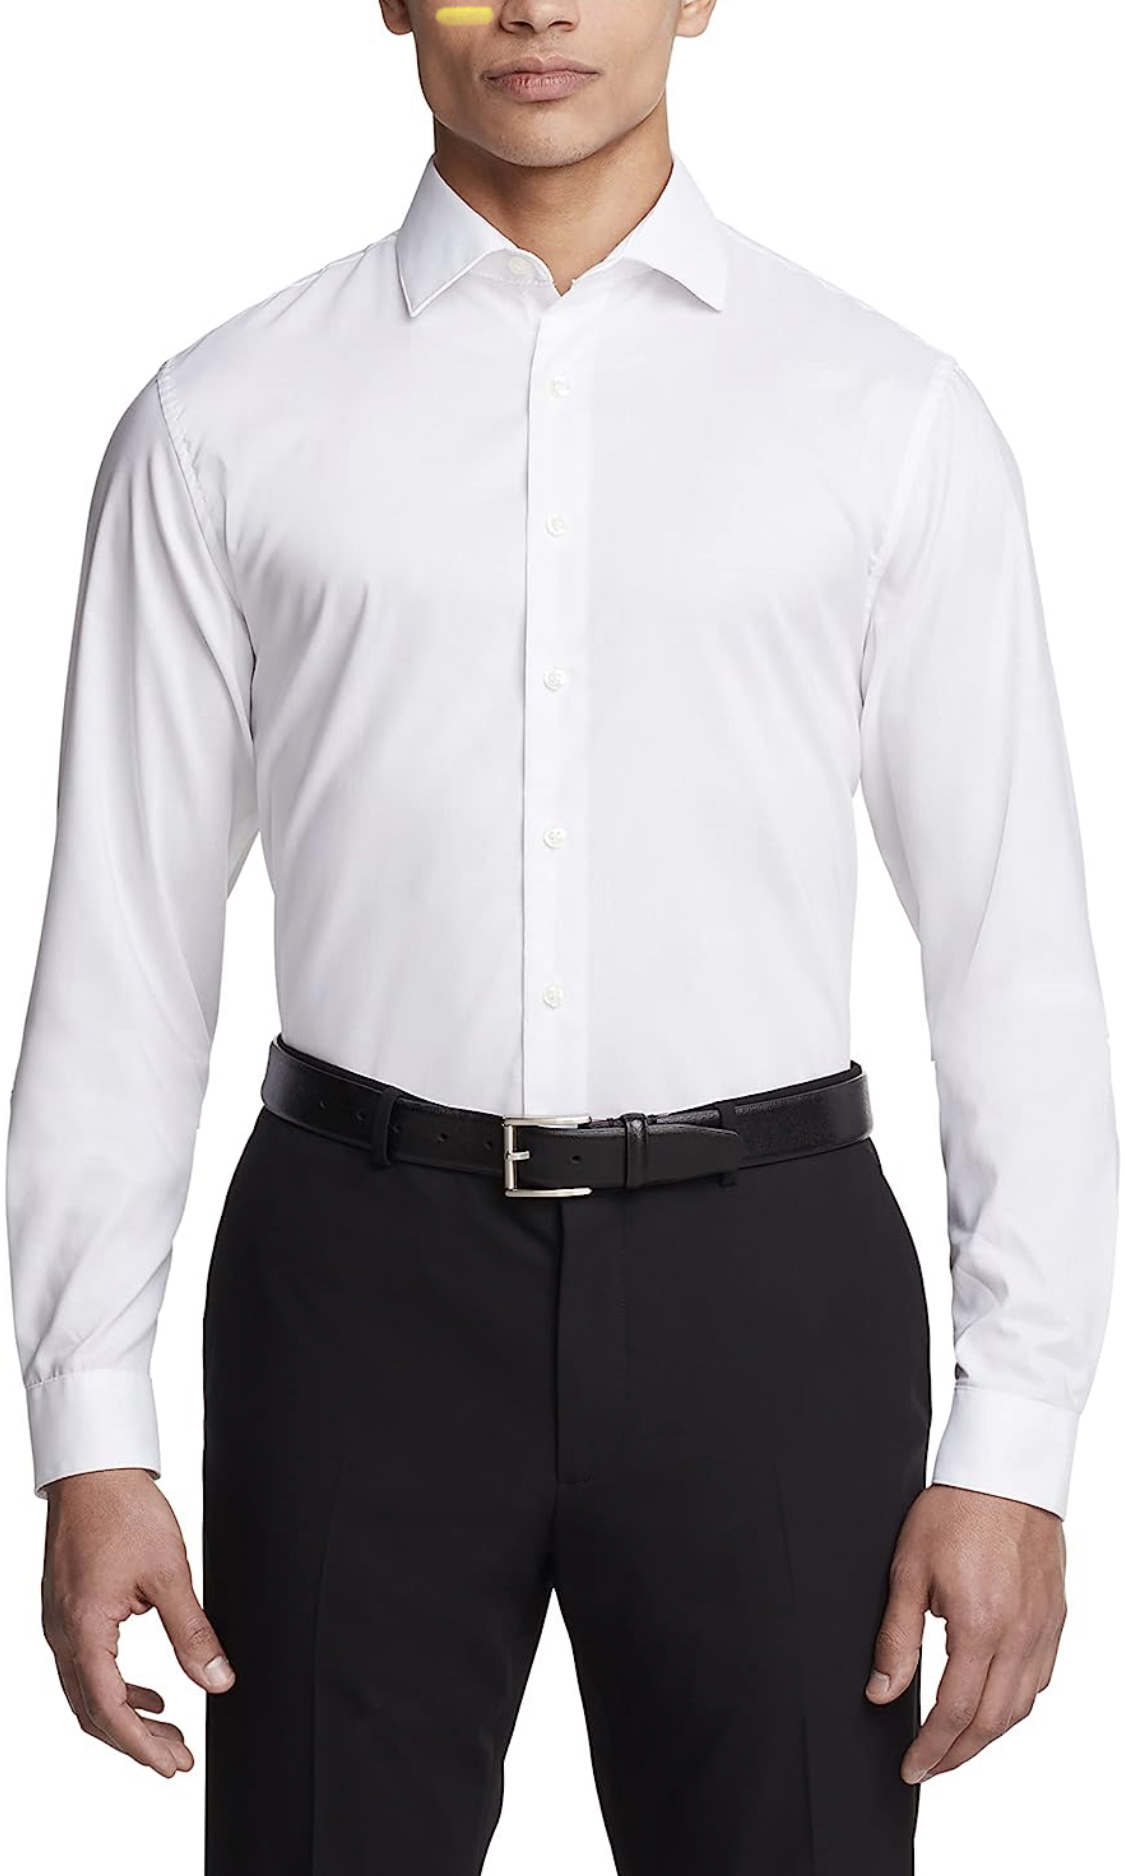 Amazon Deal: Dress Shirts by Calvin Klein, Van Heusen, and more - $15.88